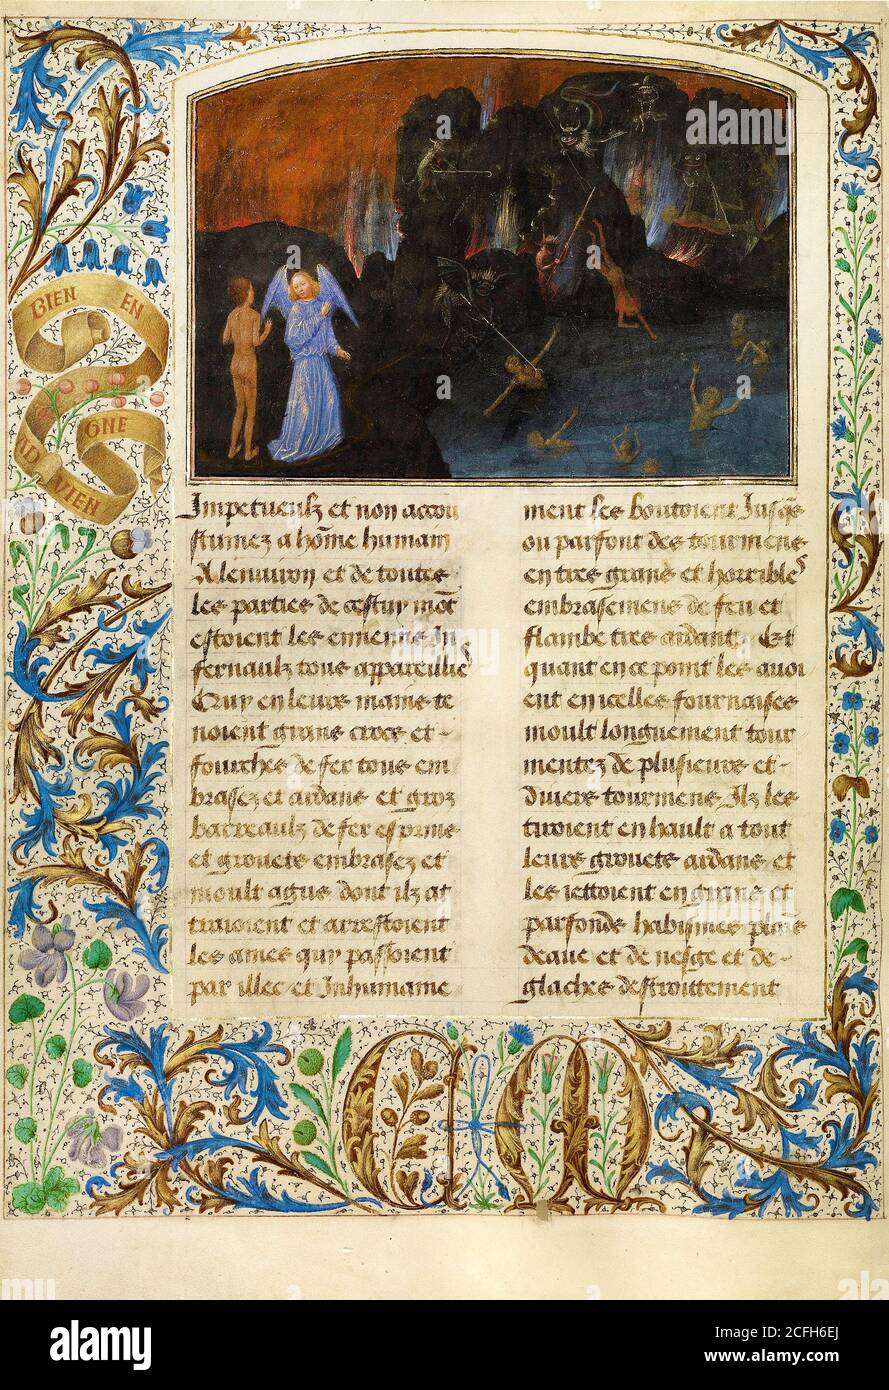 Simon Marmion, The Torment of Unbelievers and Heretics 1475 Tempera, gold, ink on parchment, The J. Paul Getty Museum, Los Angeles, USA. Stock Photo